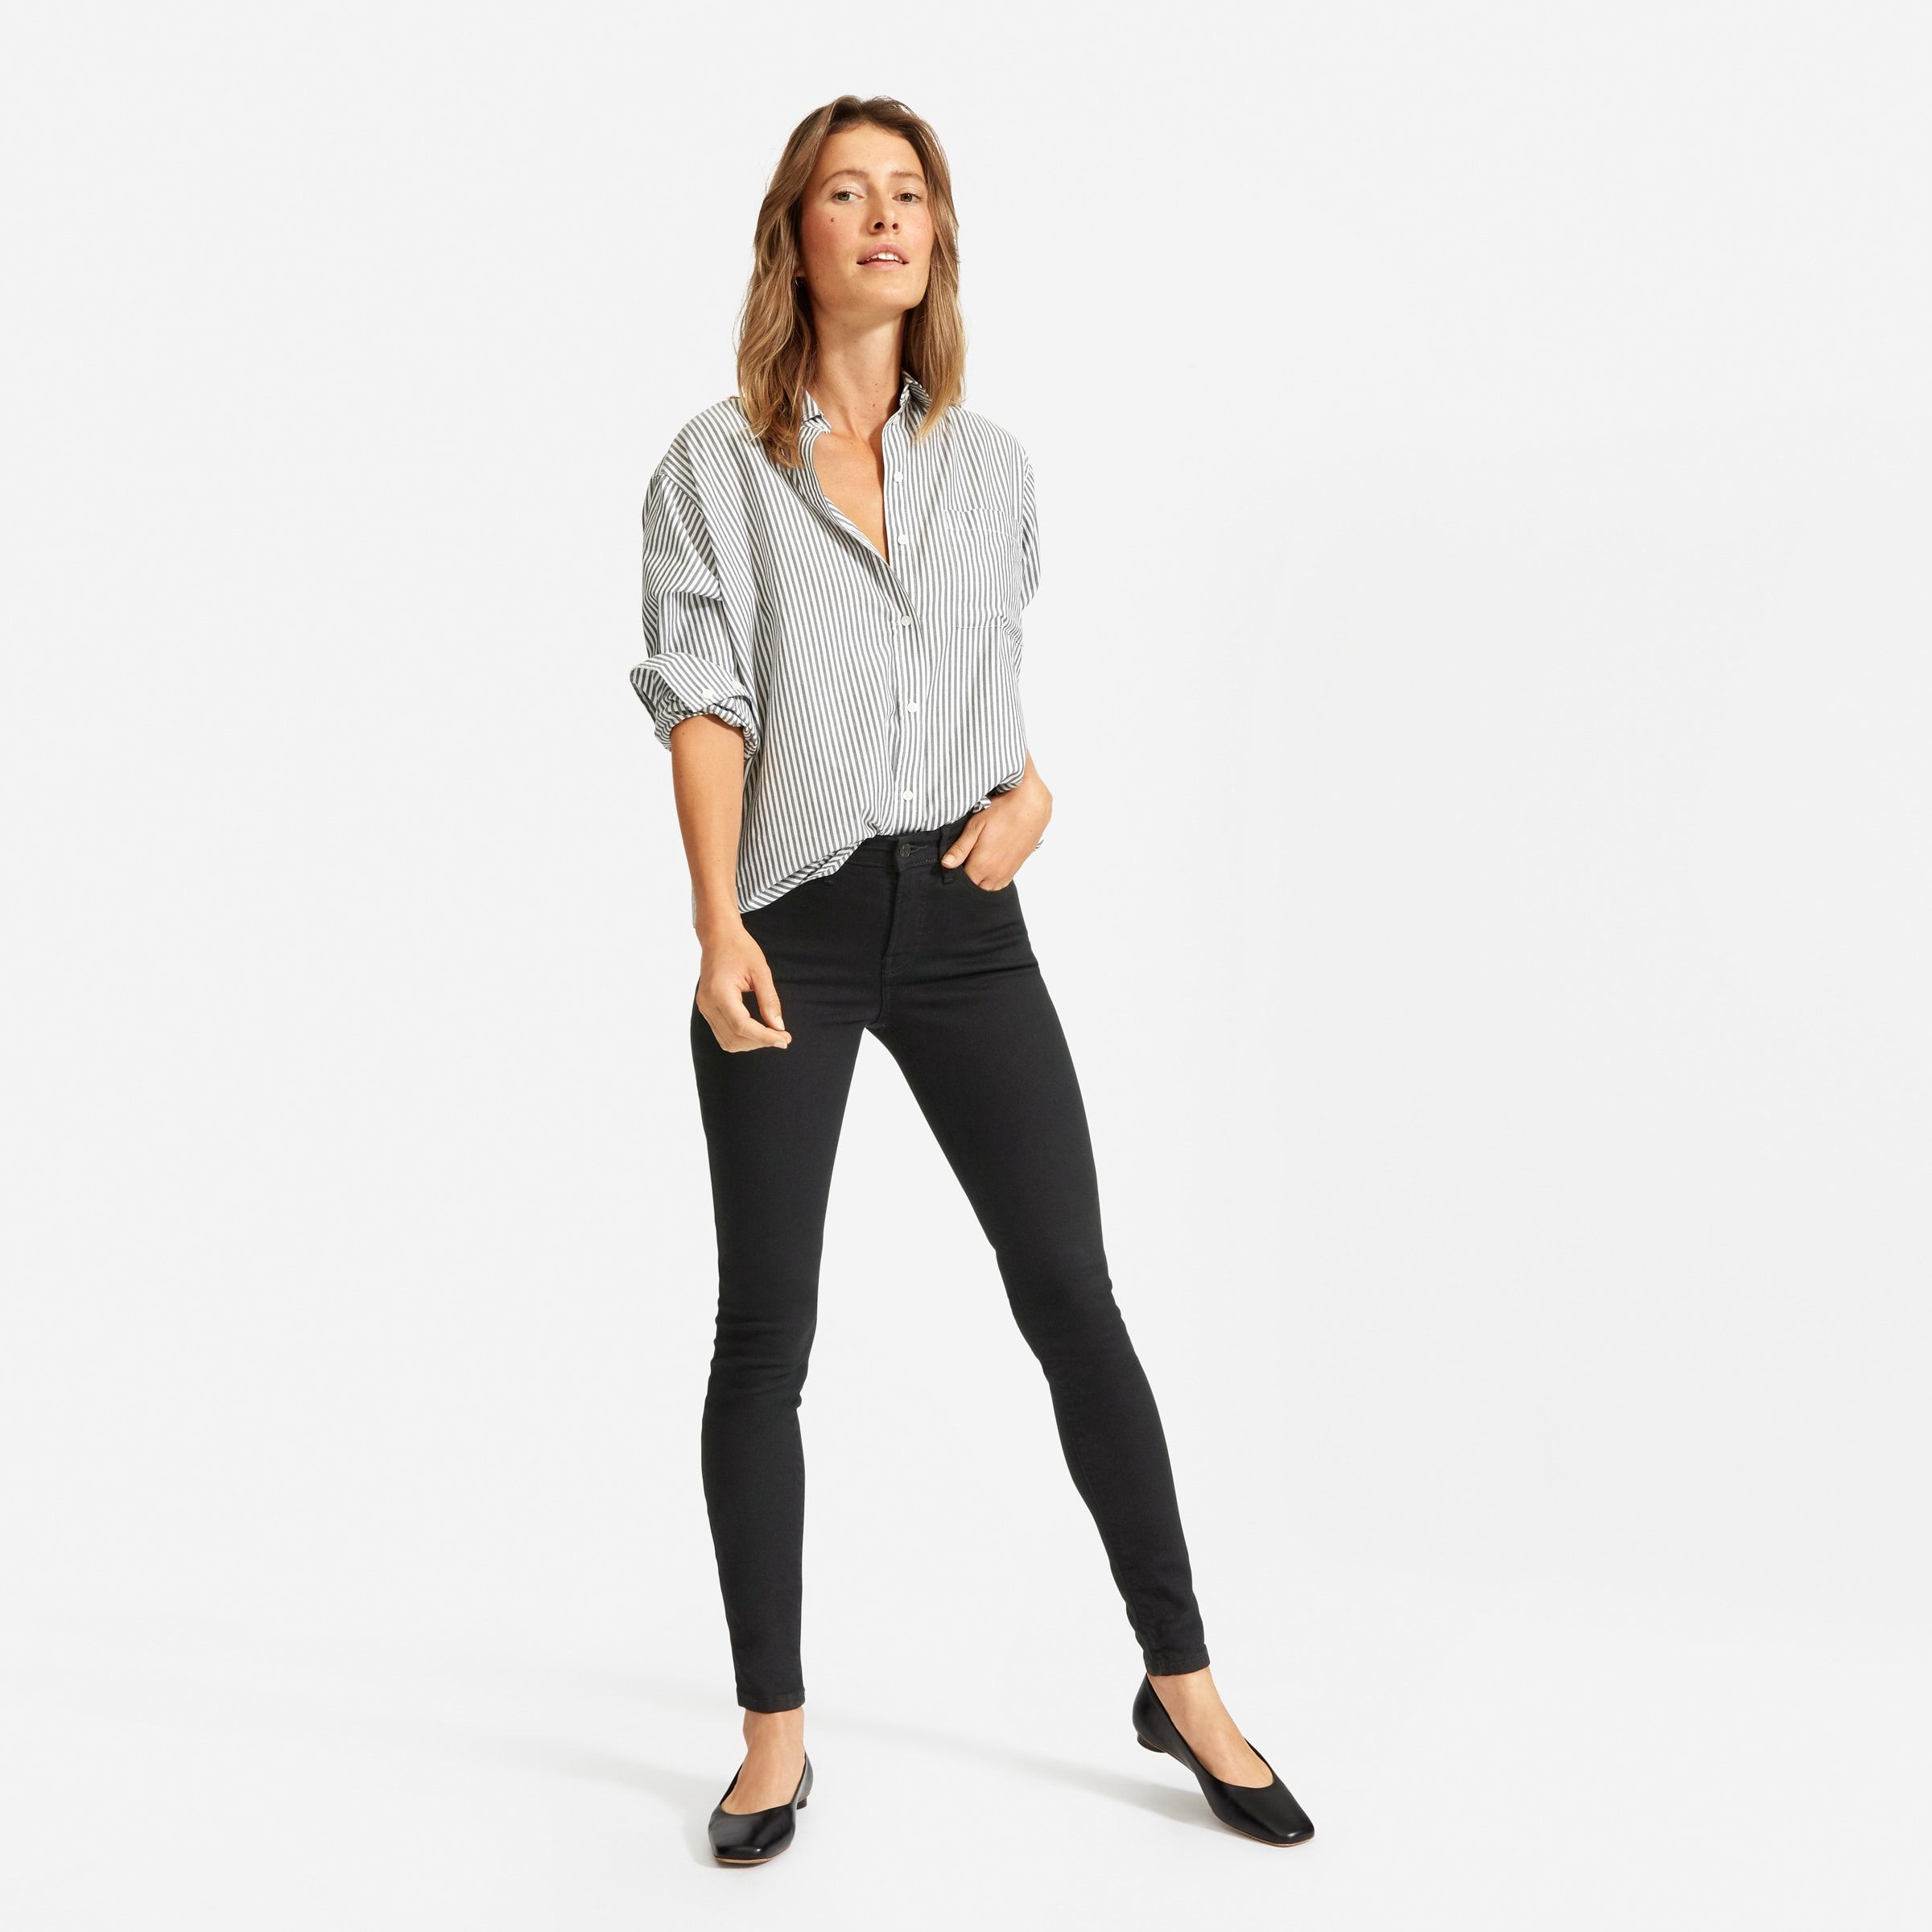 The Authentic Stretch Mid-Rise Skinny Jean (Regular) - Black